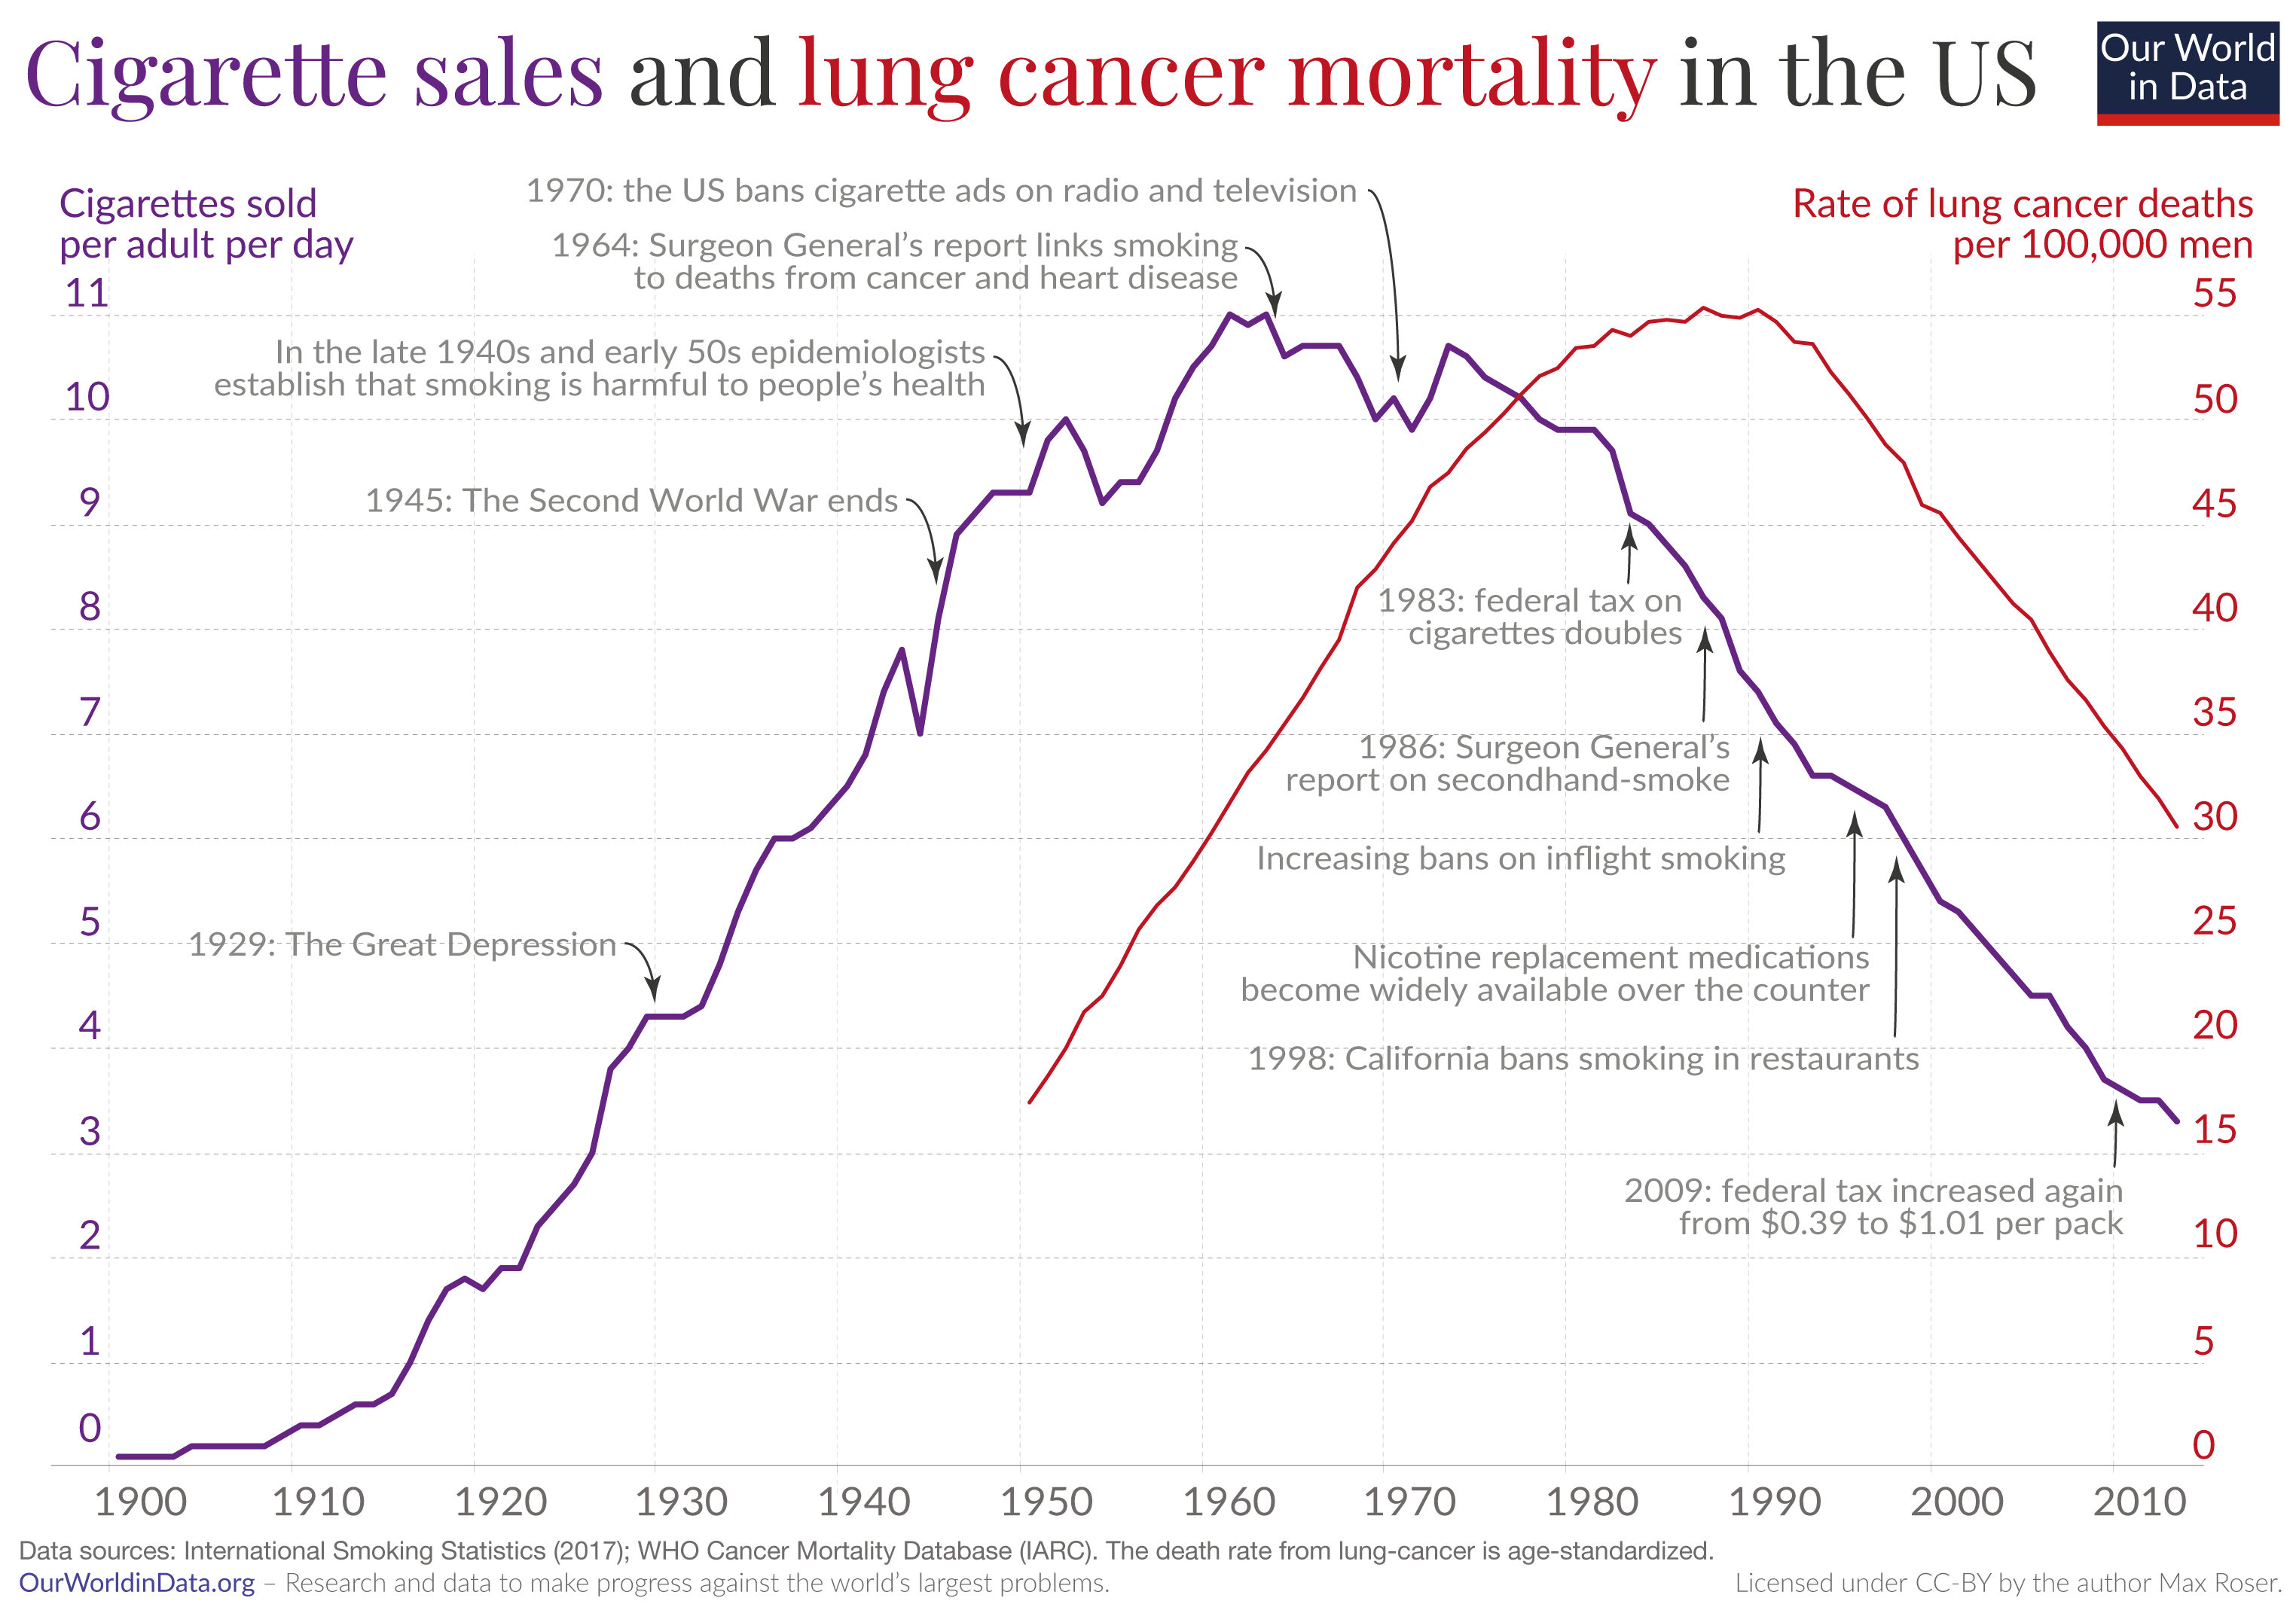 Smoking and lung cancer mortality in the US. Source: Our World in Data.